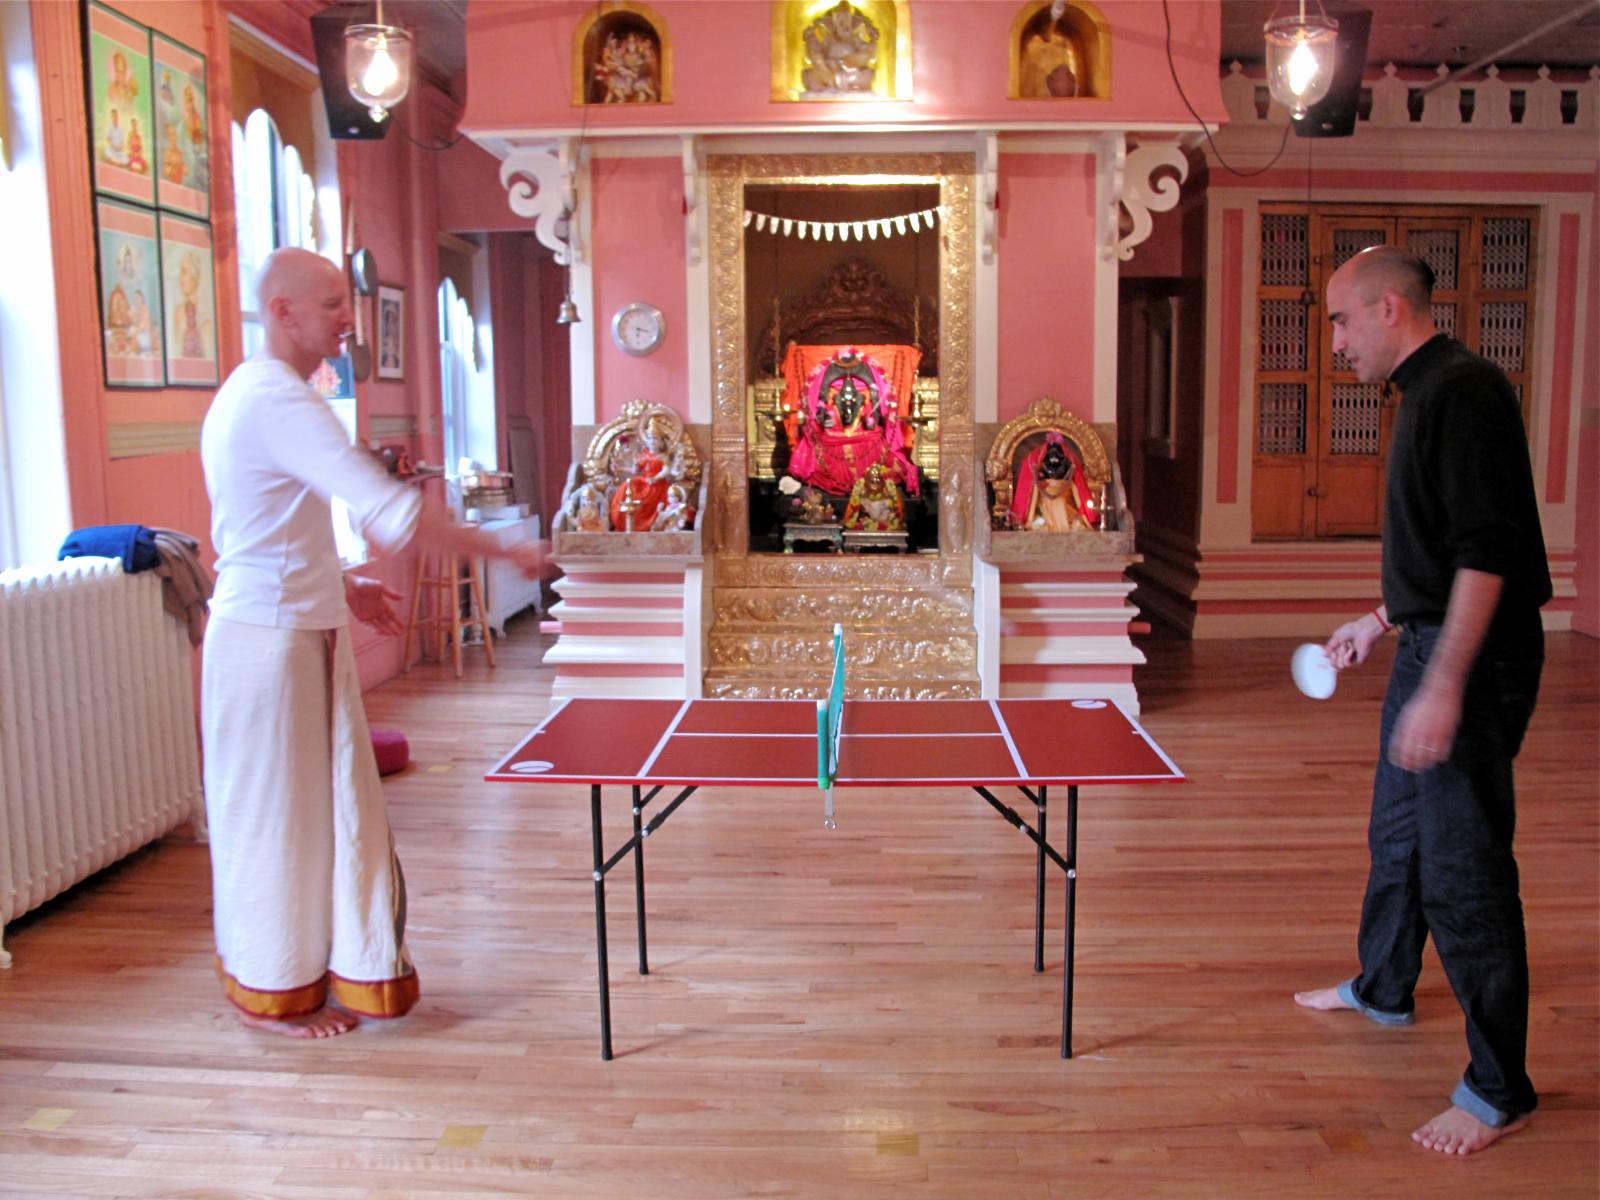 two men are playing table tennis in a pink room